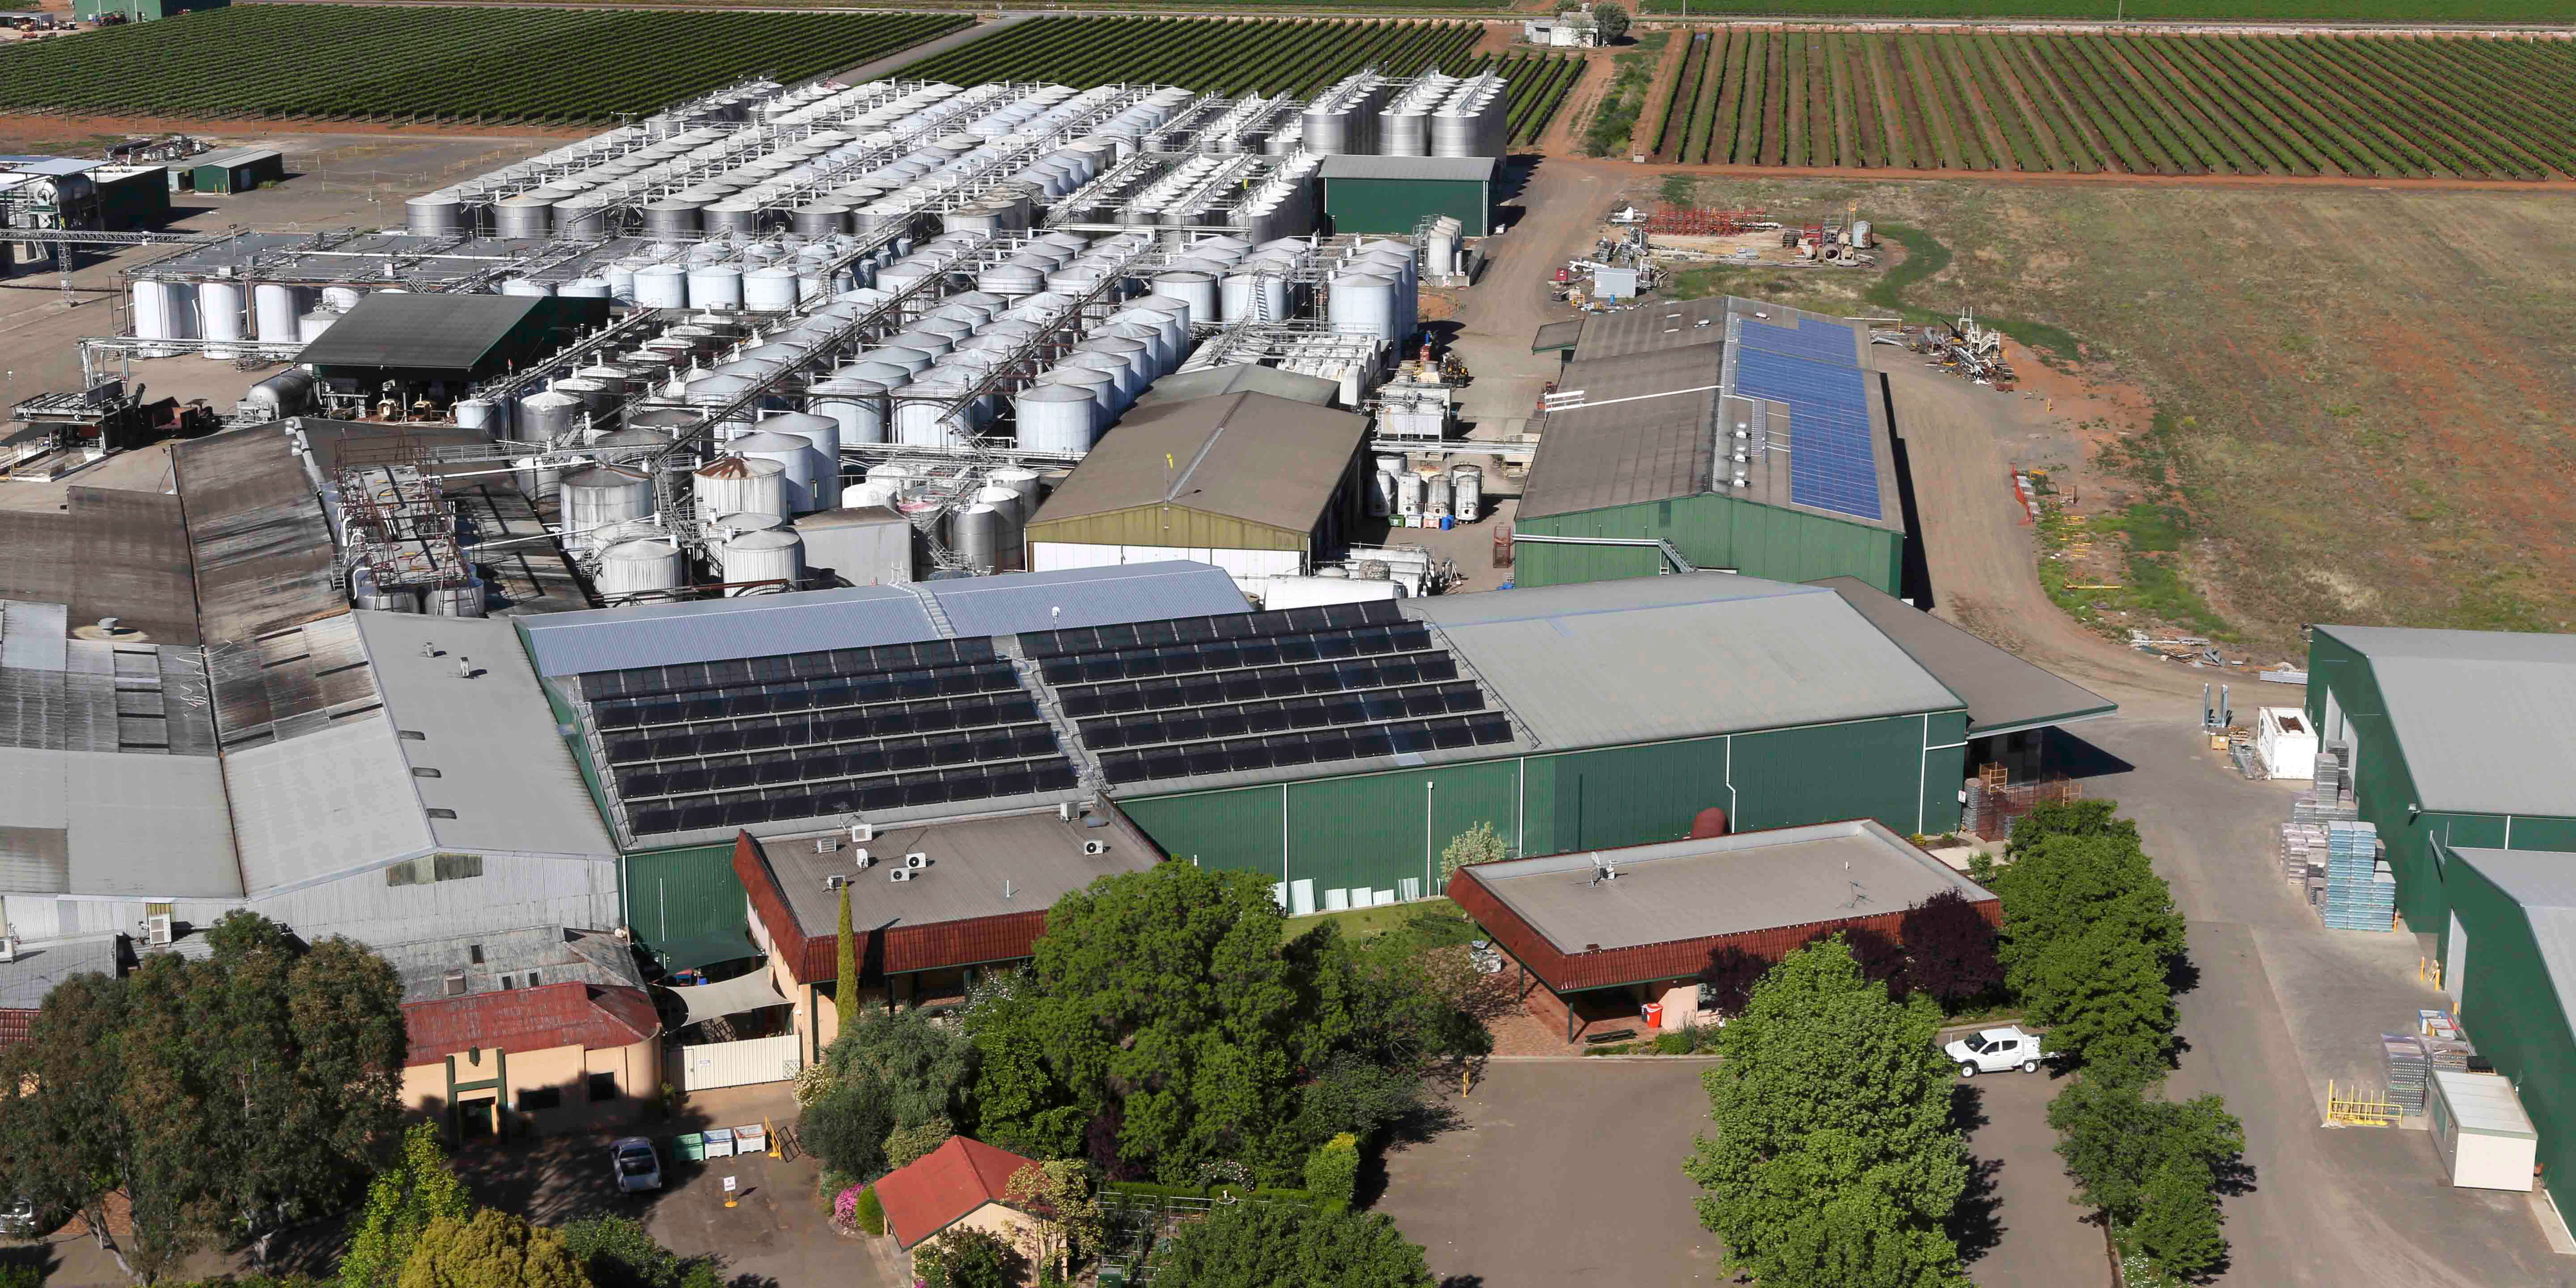 Oblique aerial image showing a large wine making facility covered in rooftop solar